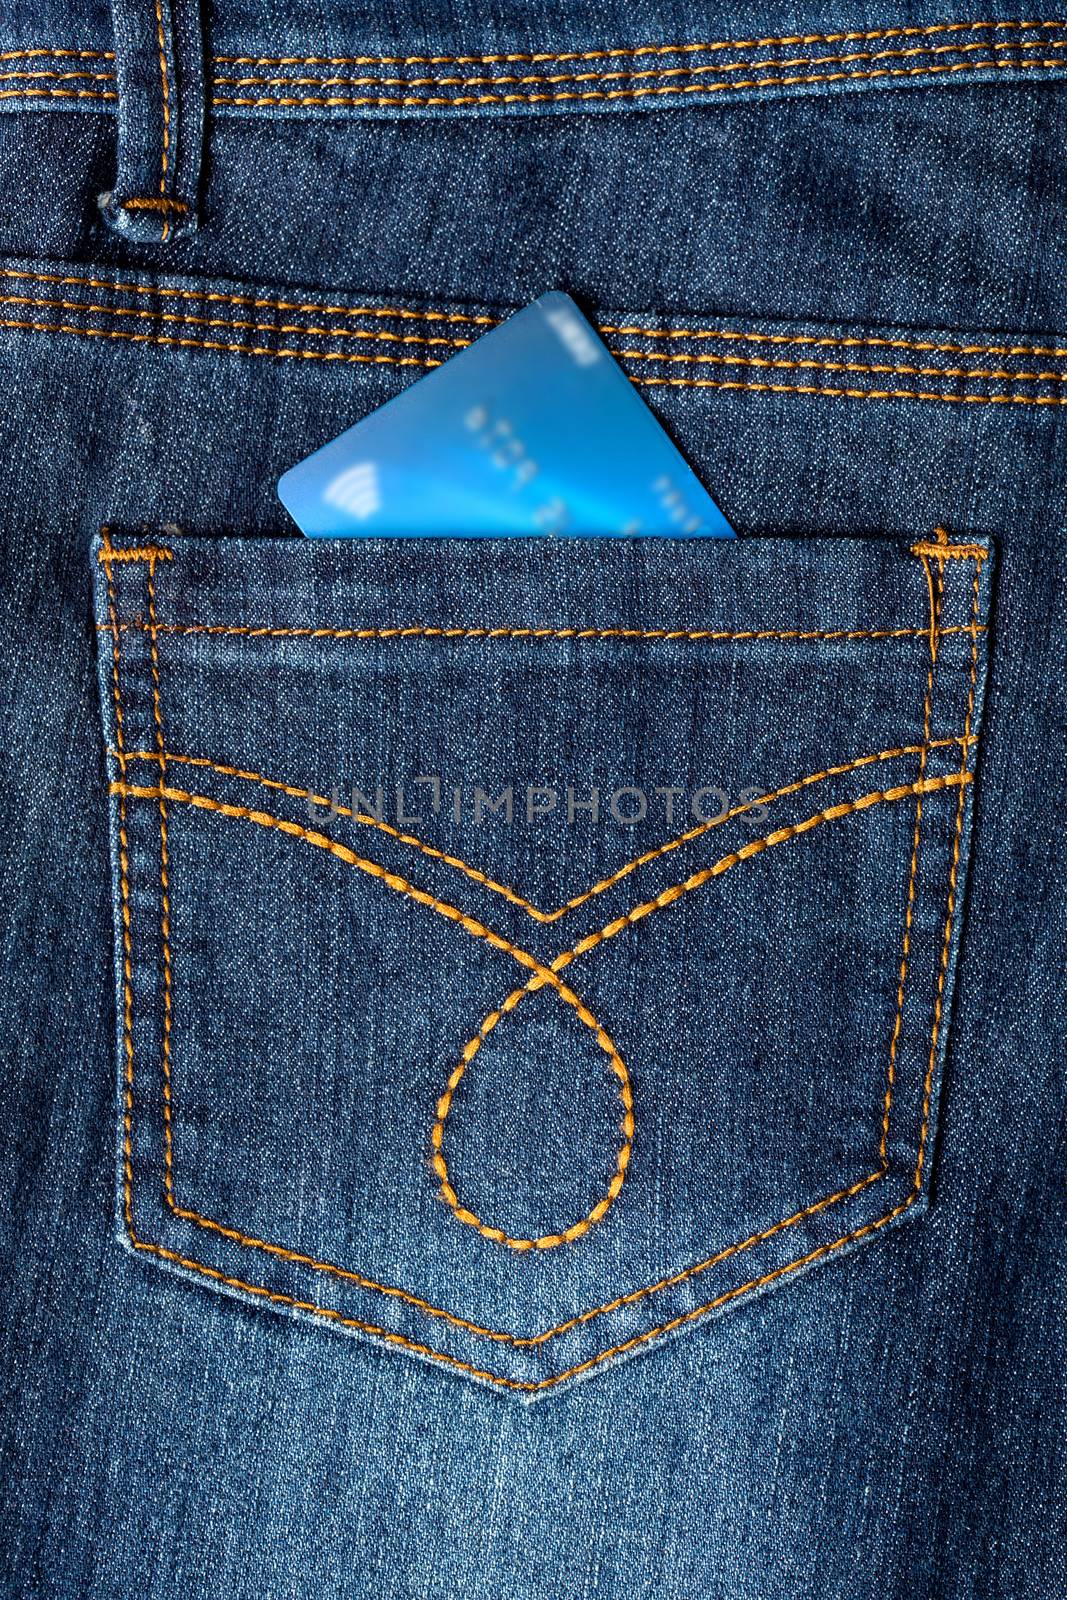 Cash card in jeans back pocket by stockyimages